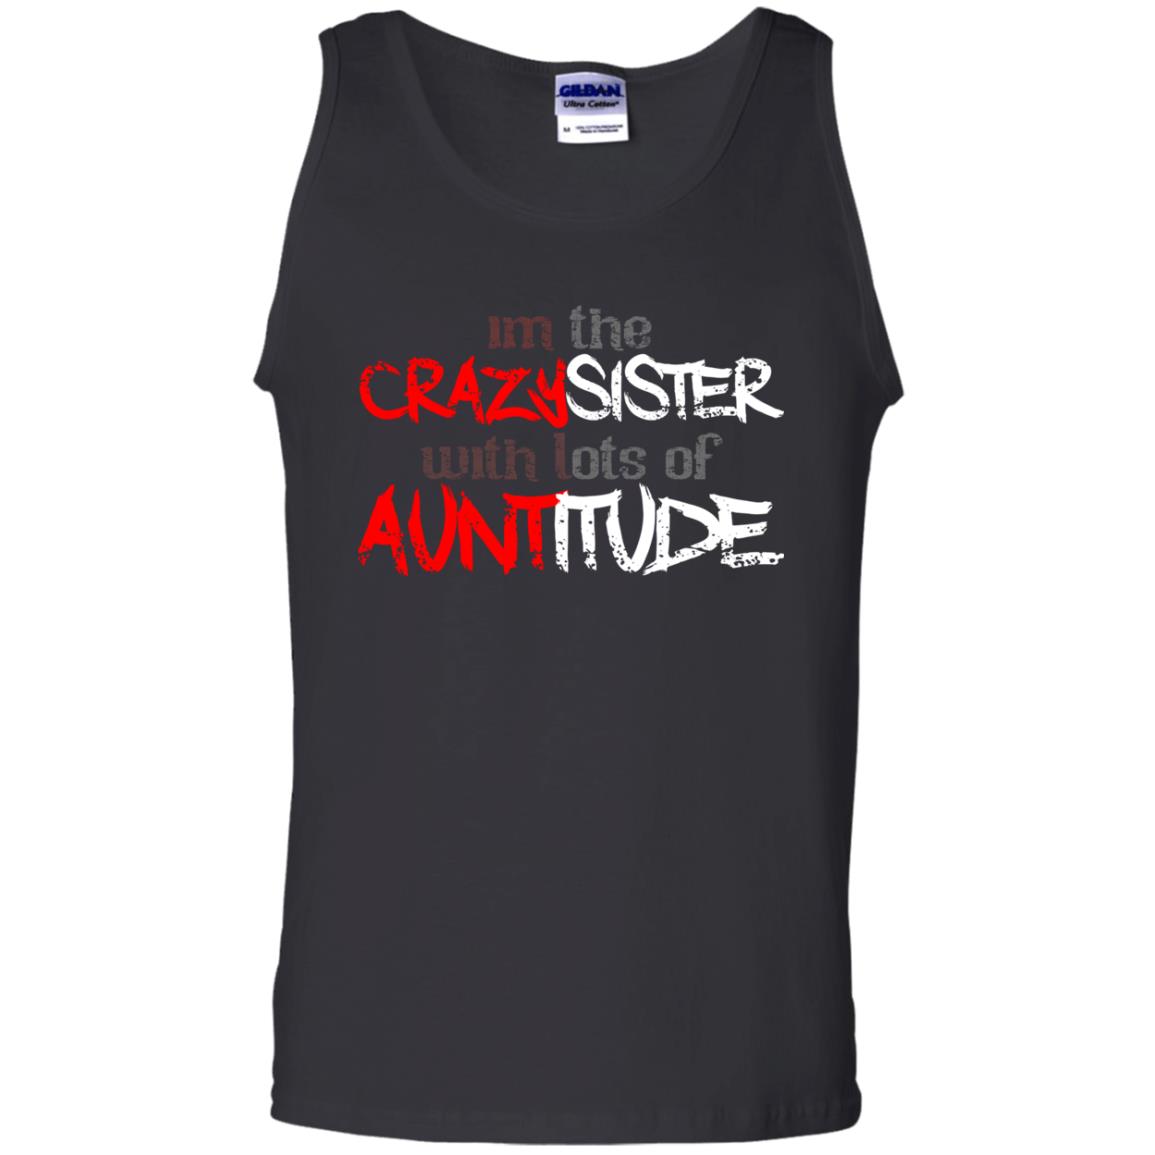 Im The Crazysister With Lots Of Auntitude